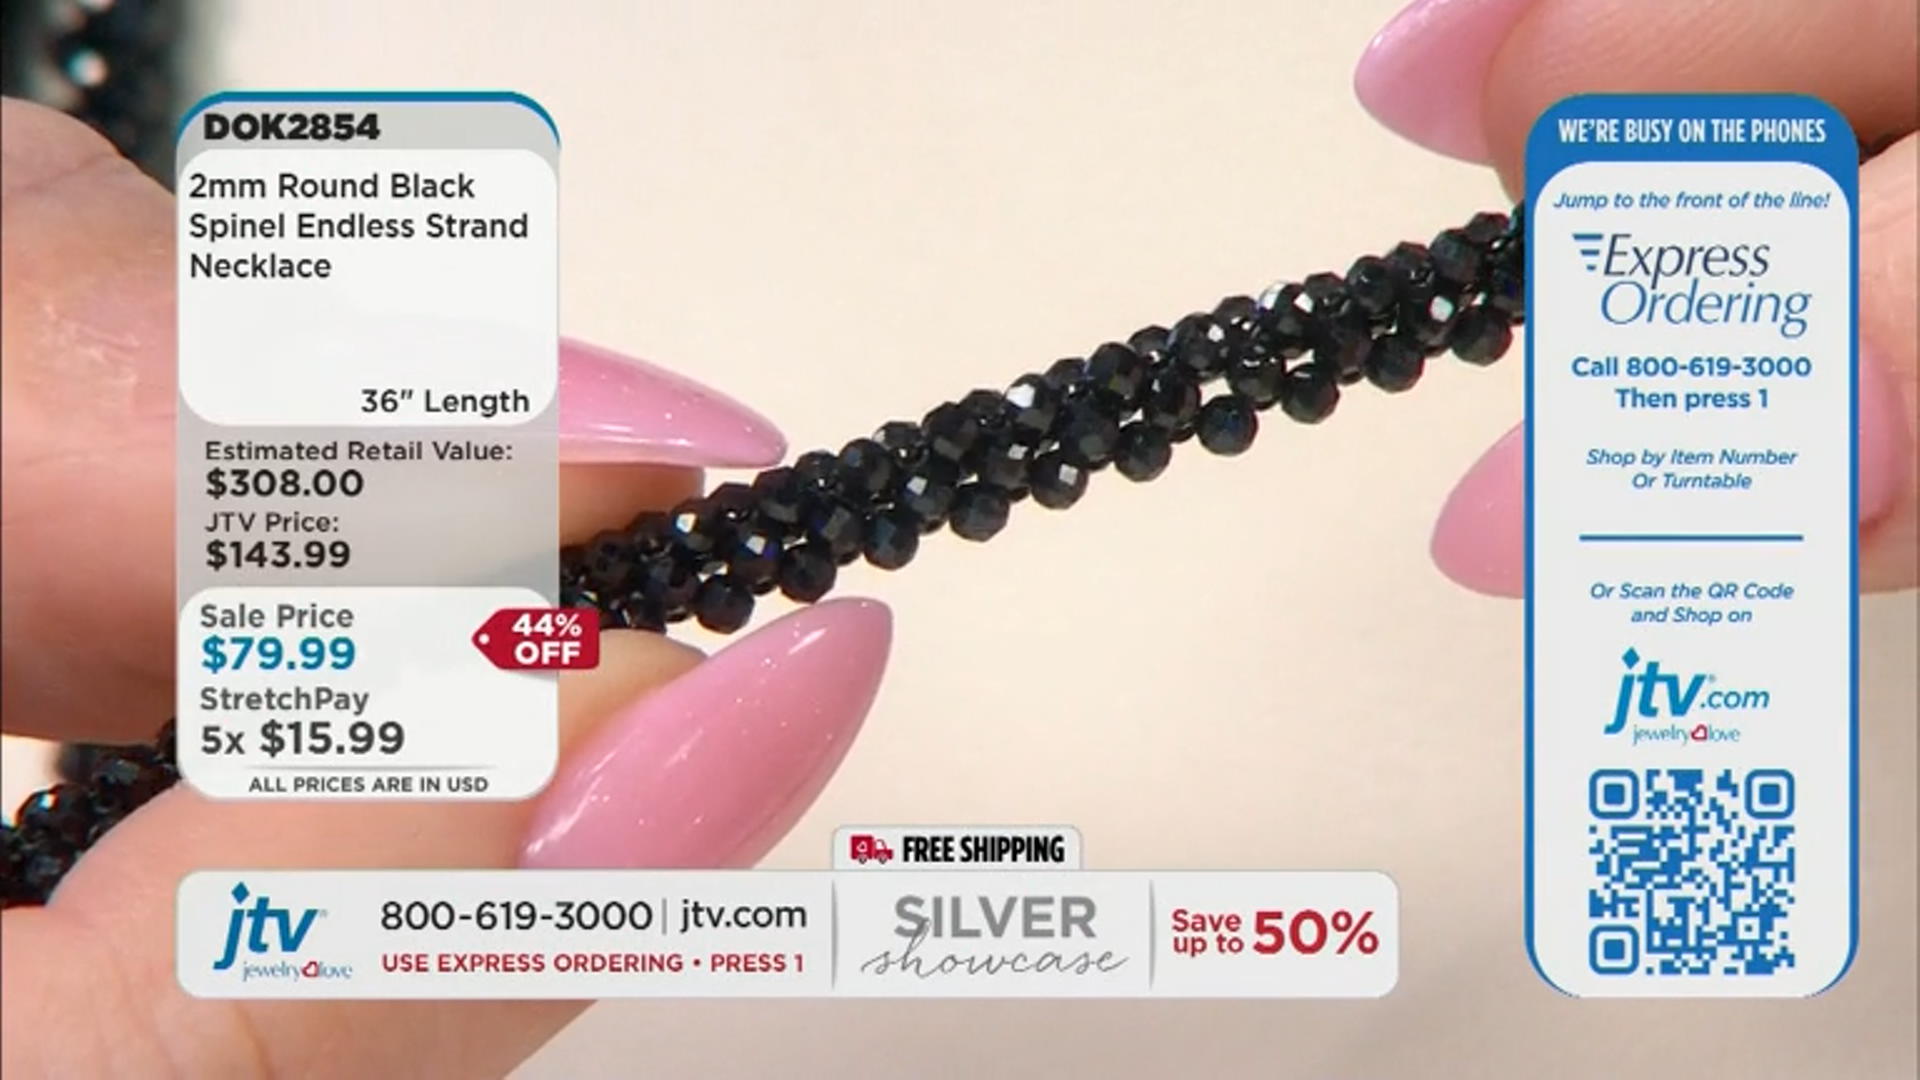 Black Spinel Endless Strand Necklace Video Thumbnail